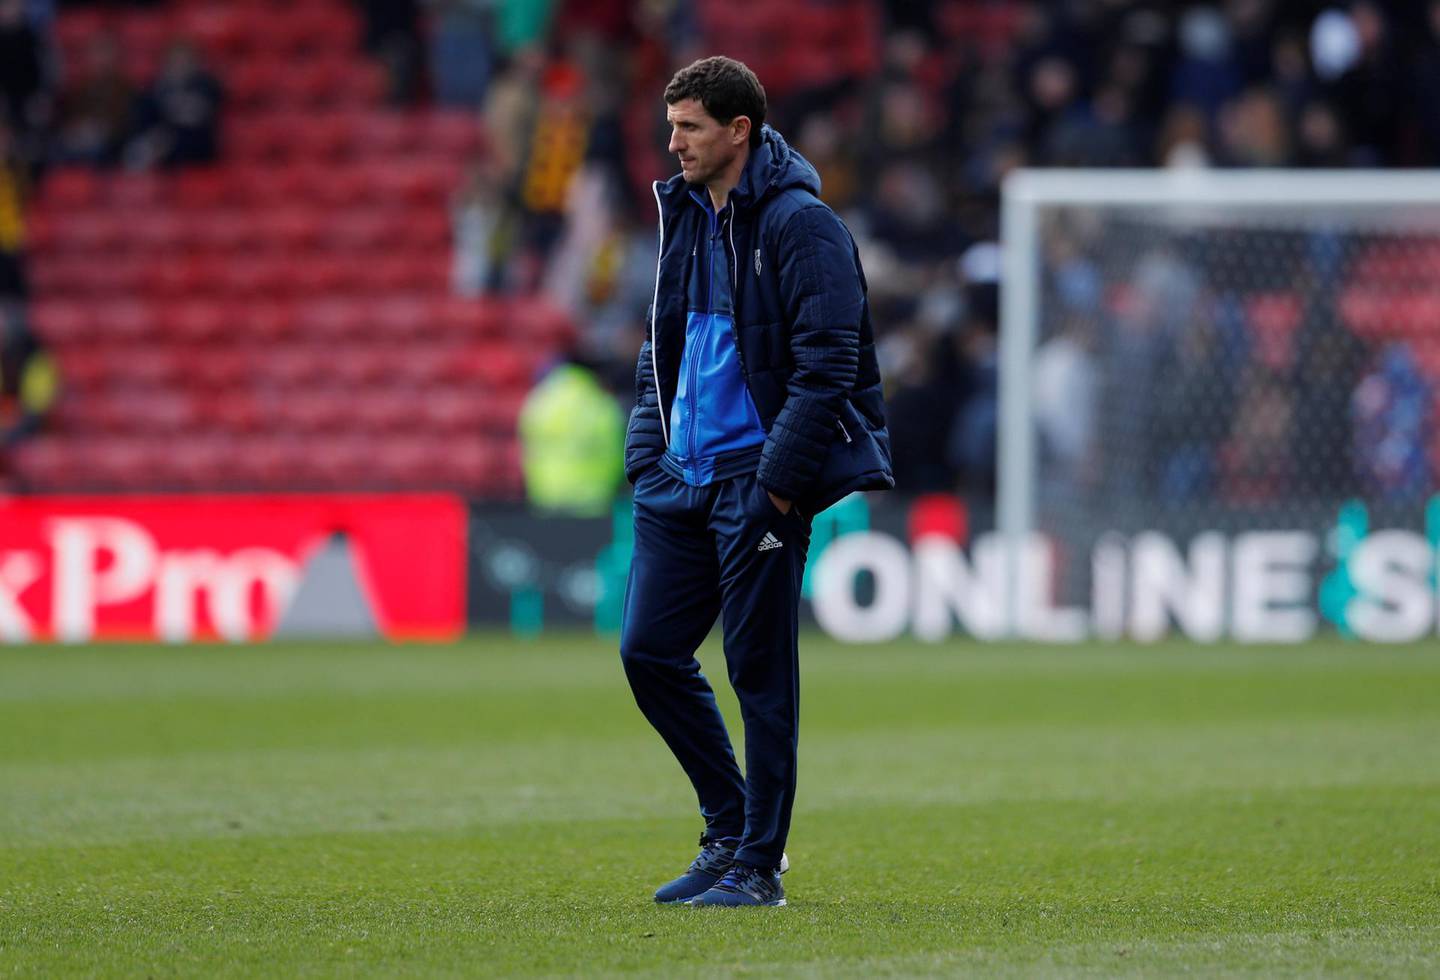 Soccer Football - Premier League - Watford vs Burnley - Vicarage Road, Watford, Britain - April 7, 2018   Watford manager Javi Gracia looks dejected after the match    Action Images via Reuters/Andrew Couldridge    EDITORIAL USE ONLY. No use with unauthorized audio, video, data, fixture lists, club/league logos or "live" services. Online in-match use limited to 75 images, no video emulation. No use in betting, games or single club/league/player publications.  Please contact your account representative for further details.